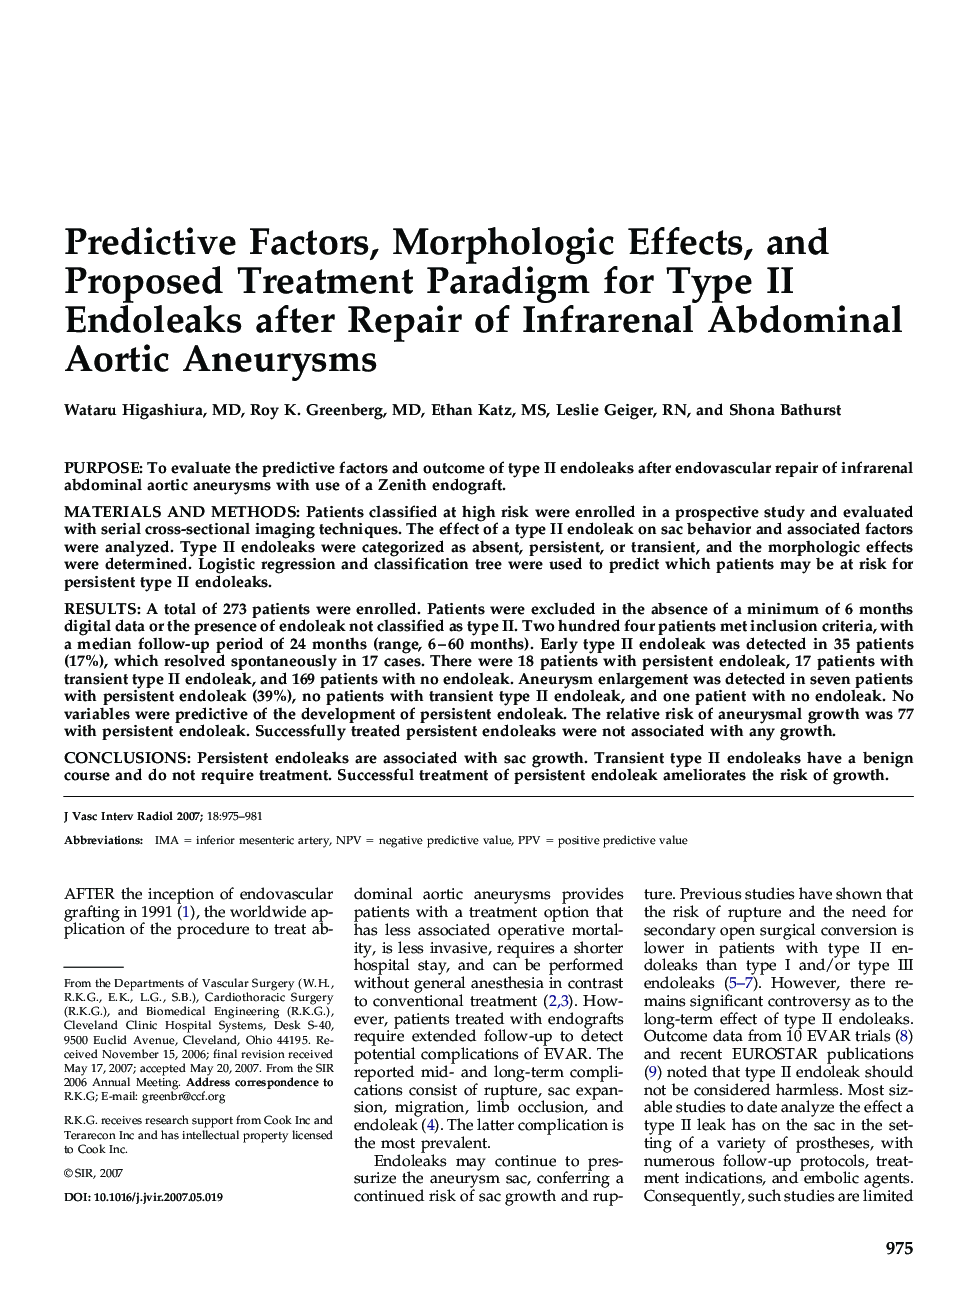 Predictive Factors, Morphologic Effects, and Proposed Treatment Paradigm for Type II Endoleaks after Repair of Infrarenal Abdominal Aortic Aneurysms